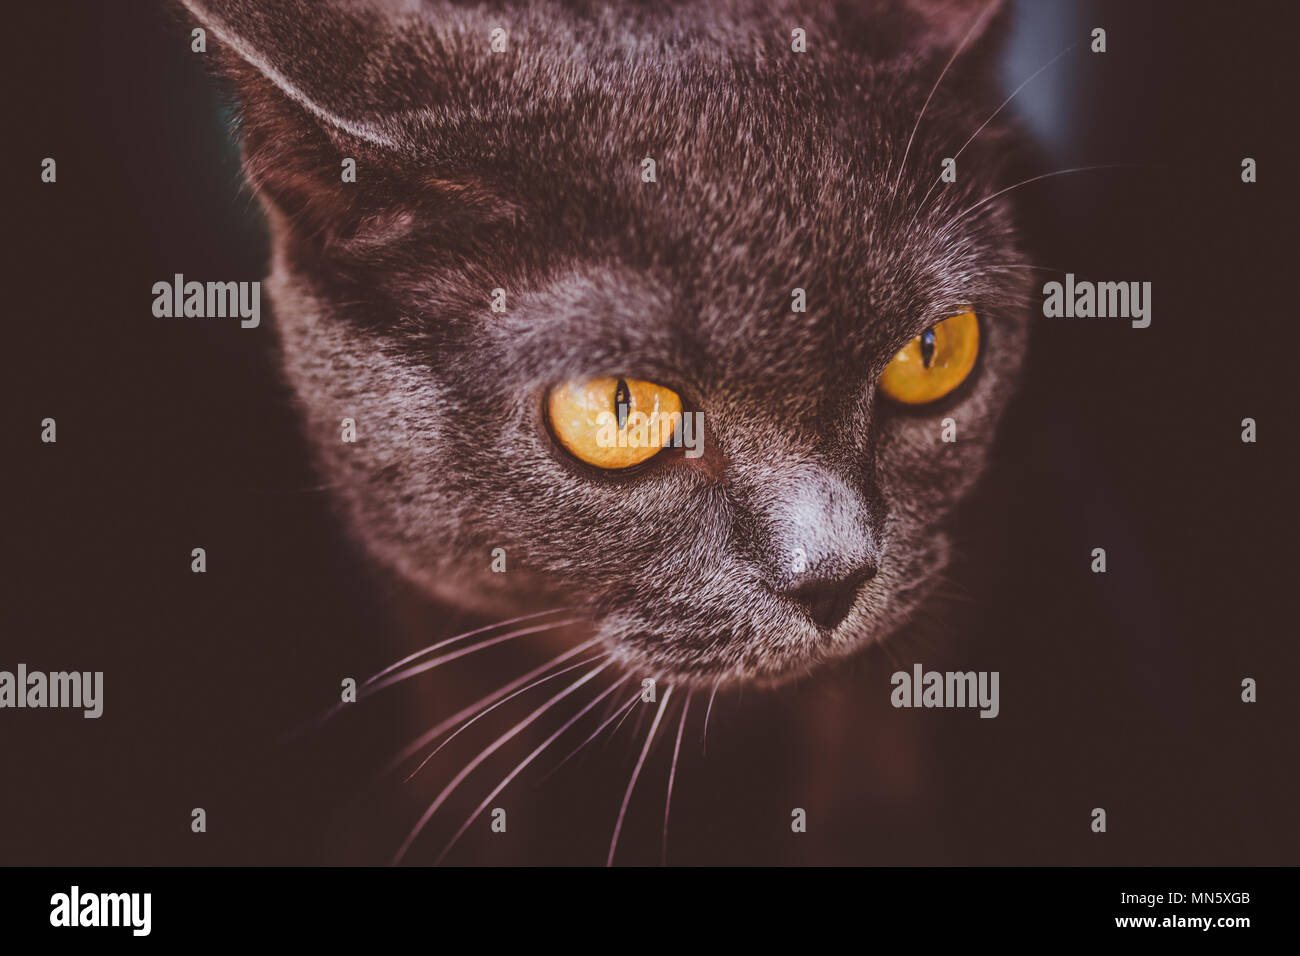 Portrait Of Frightened British Shorthair Grey Cat With Yellow Eyes